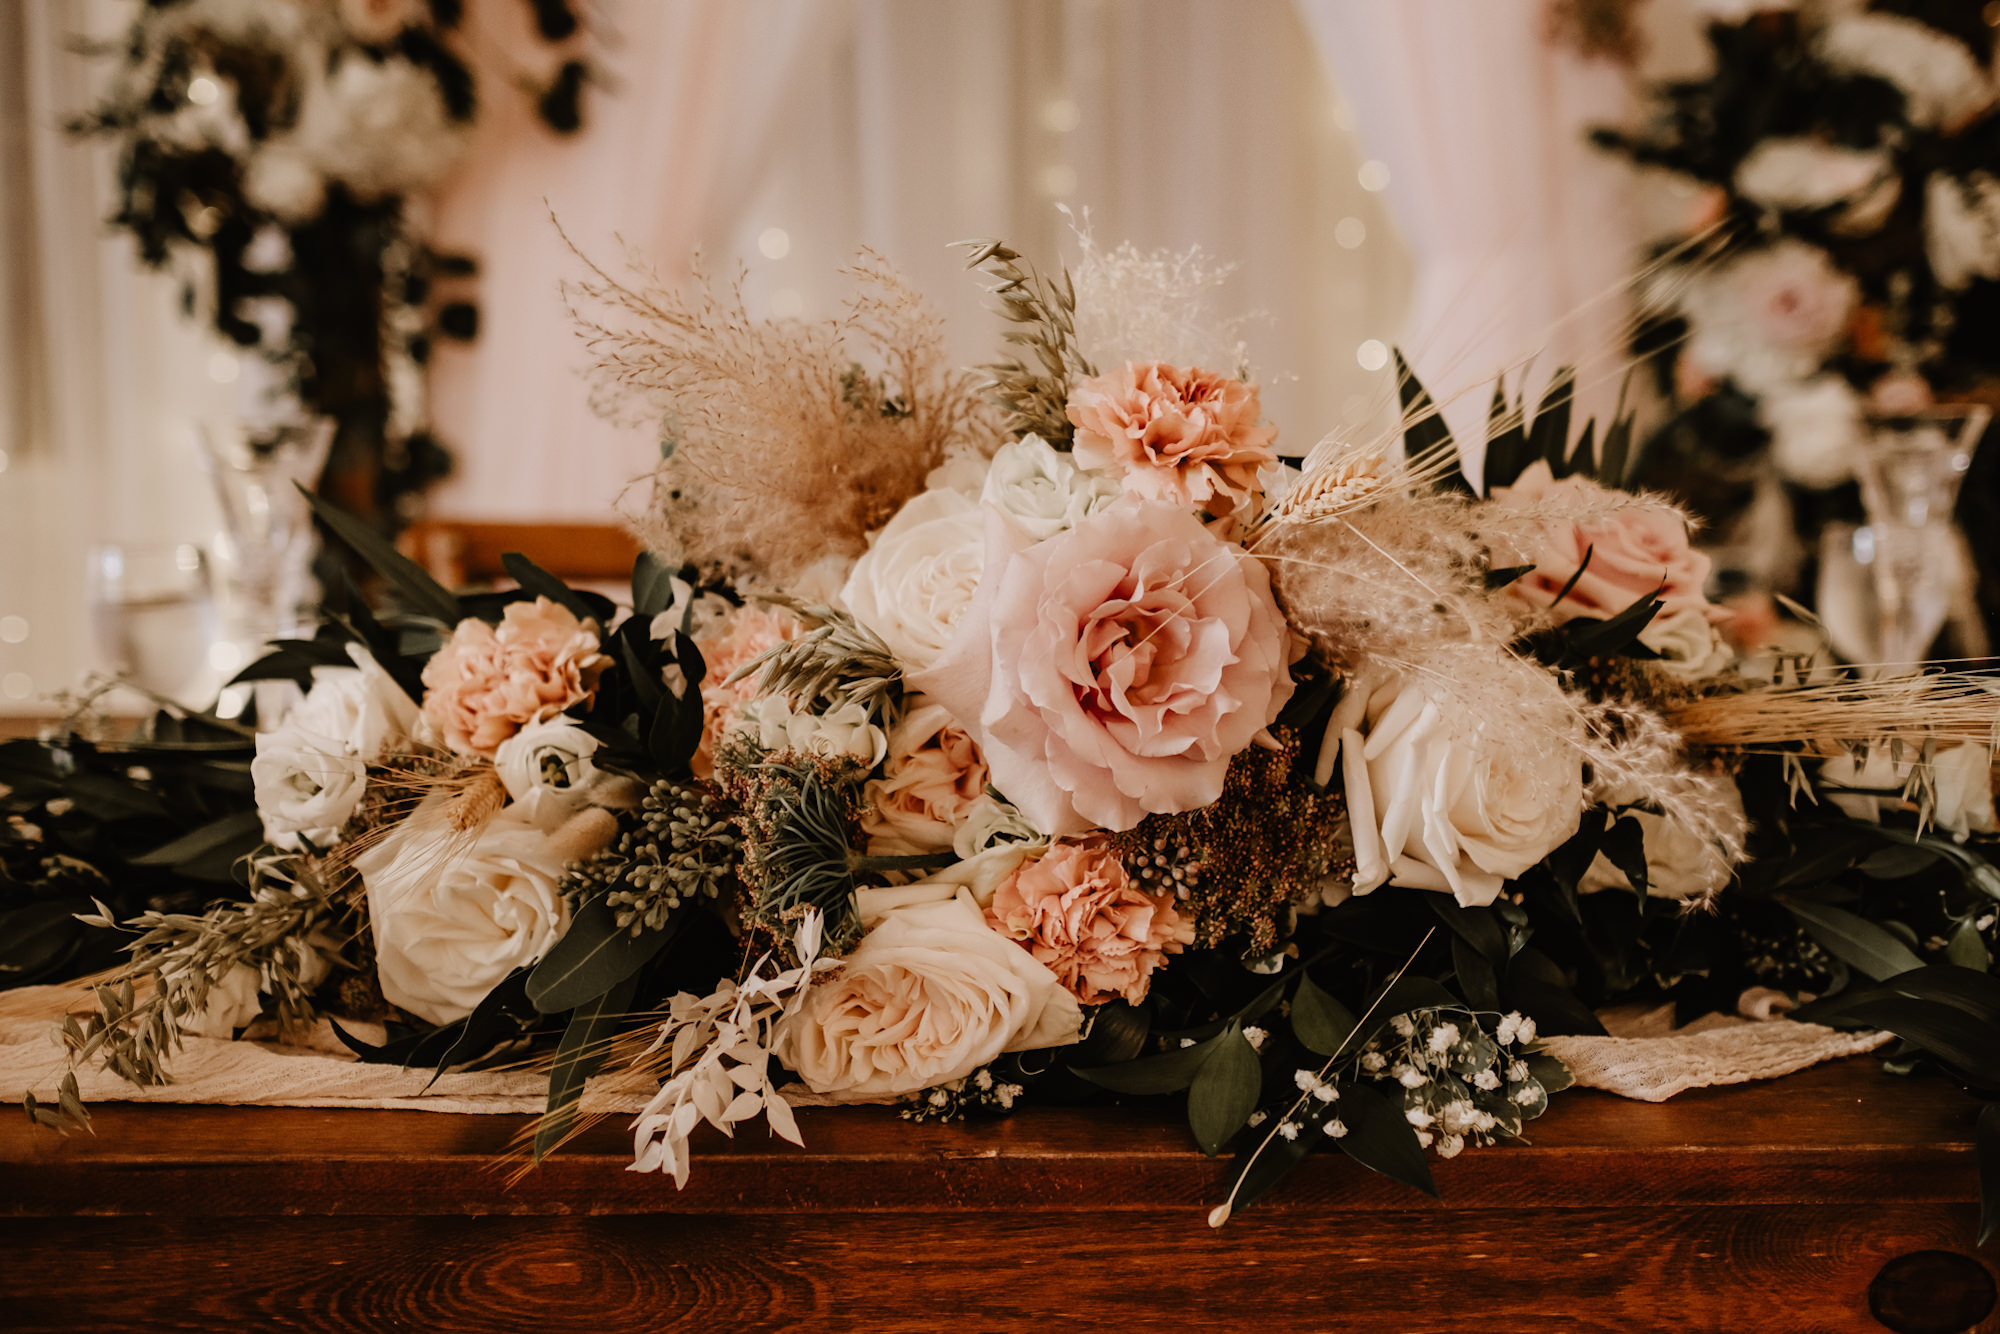 Neutral Boho Modern Wedding Reception Decor, Blush Pink and White Roses, Babys Breathe, Greenery Pampas Grass Floral Bouquet